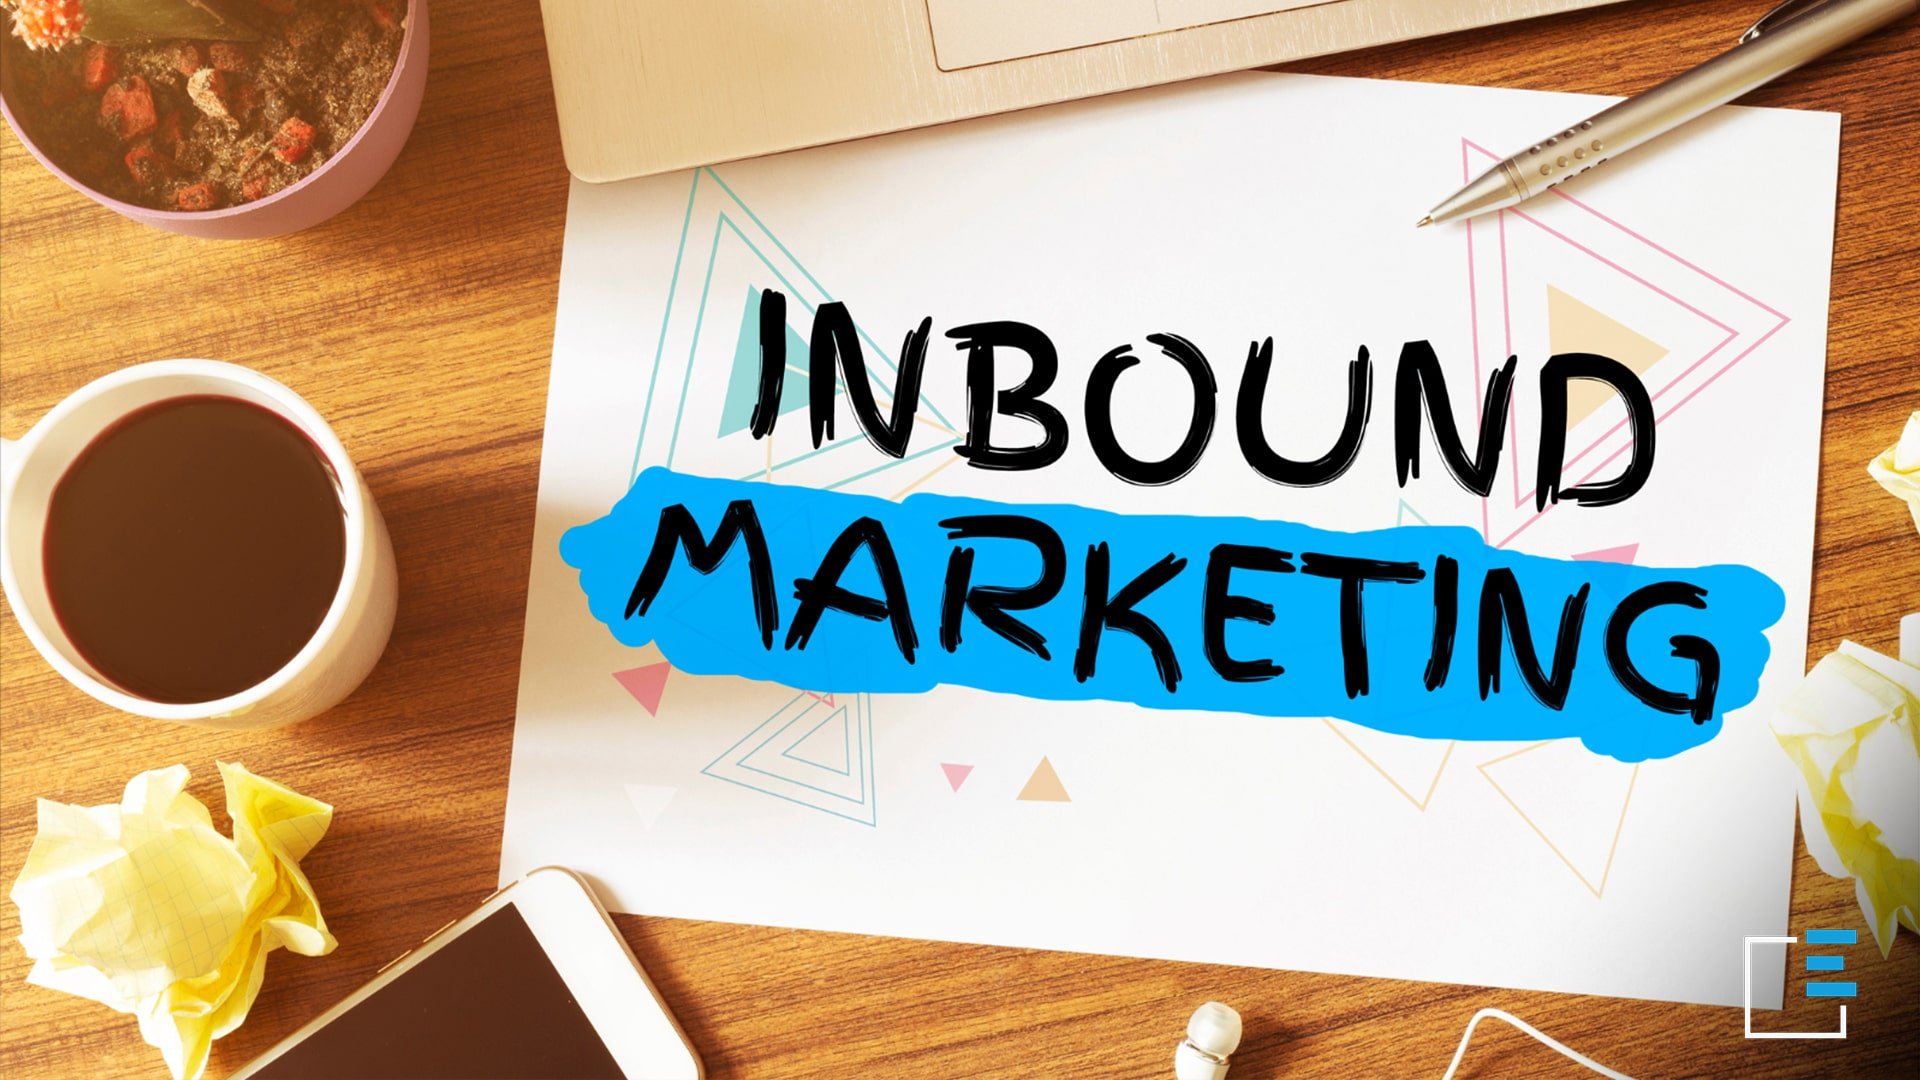 Inbound and outbound: the differences in strategies